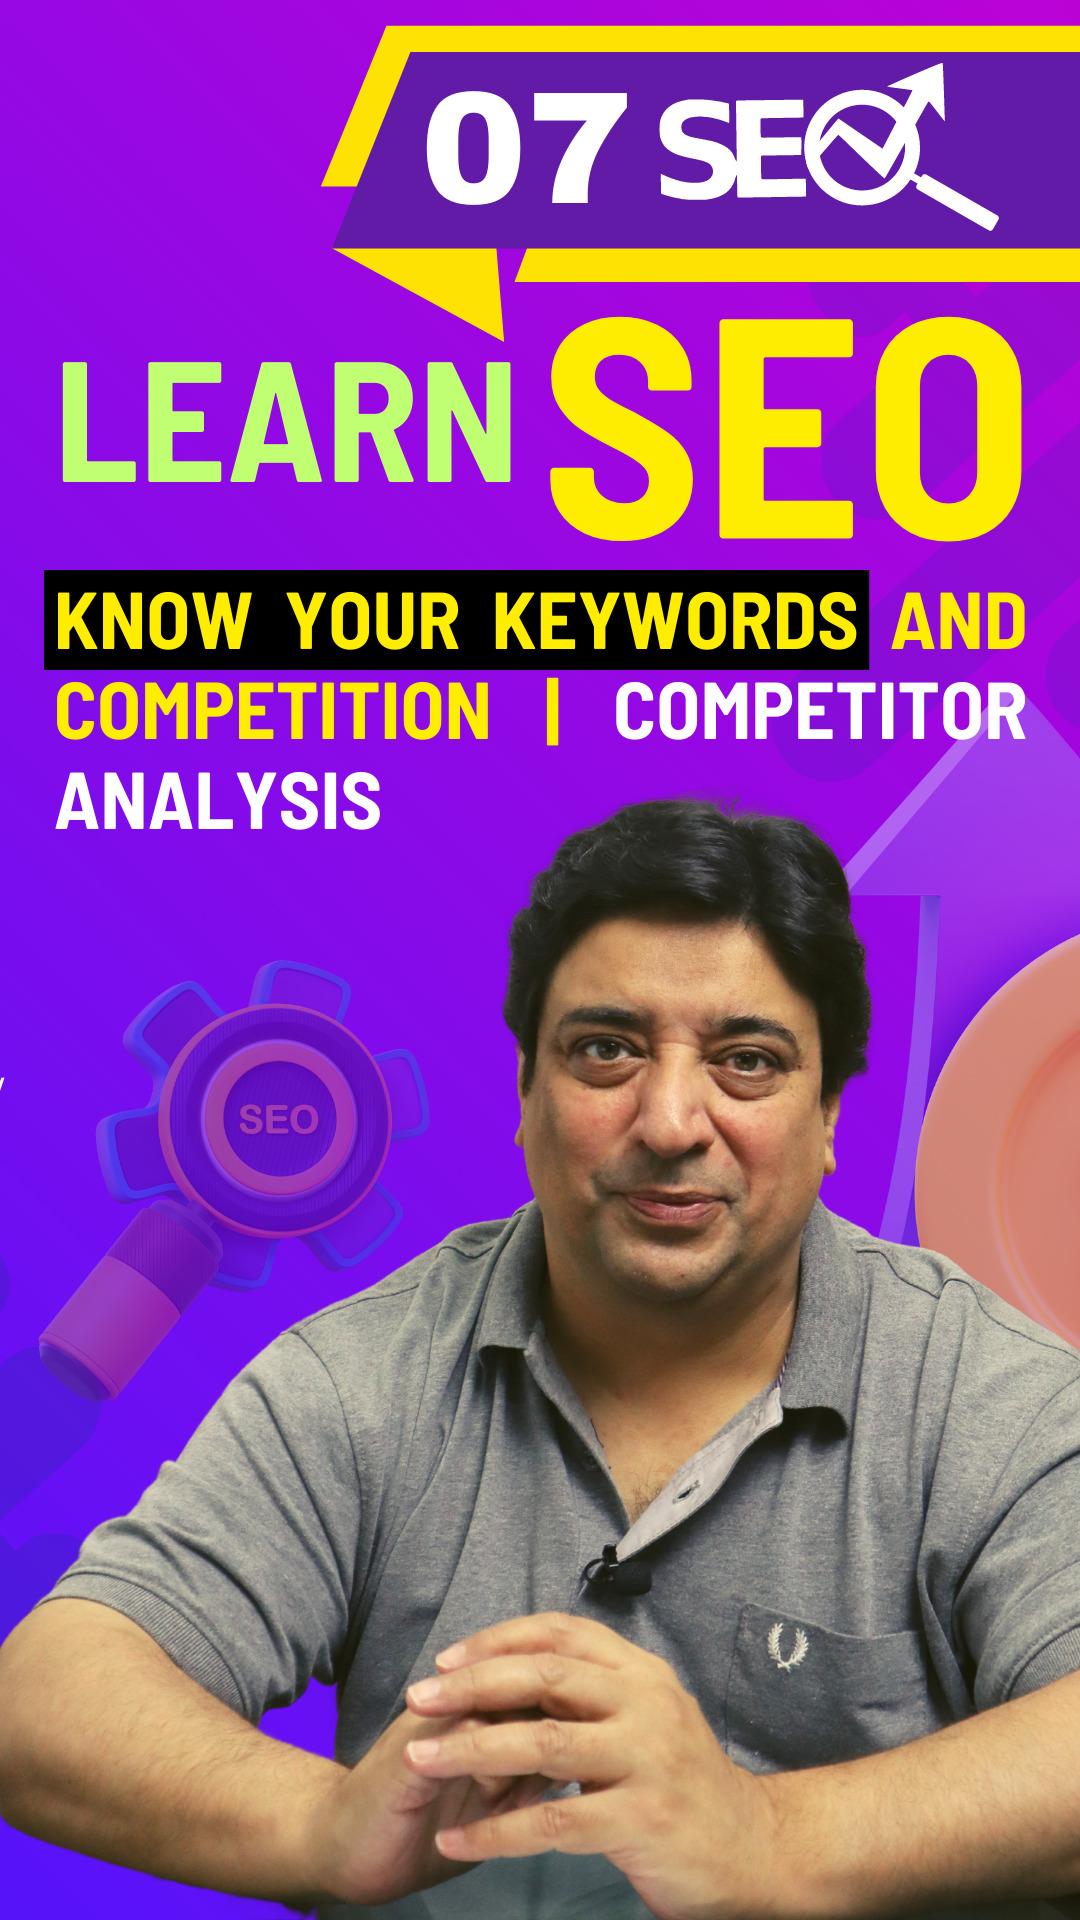 Identify your keywords and competitors with a competitor analysis